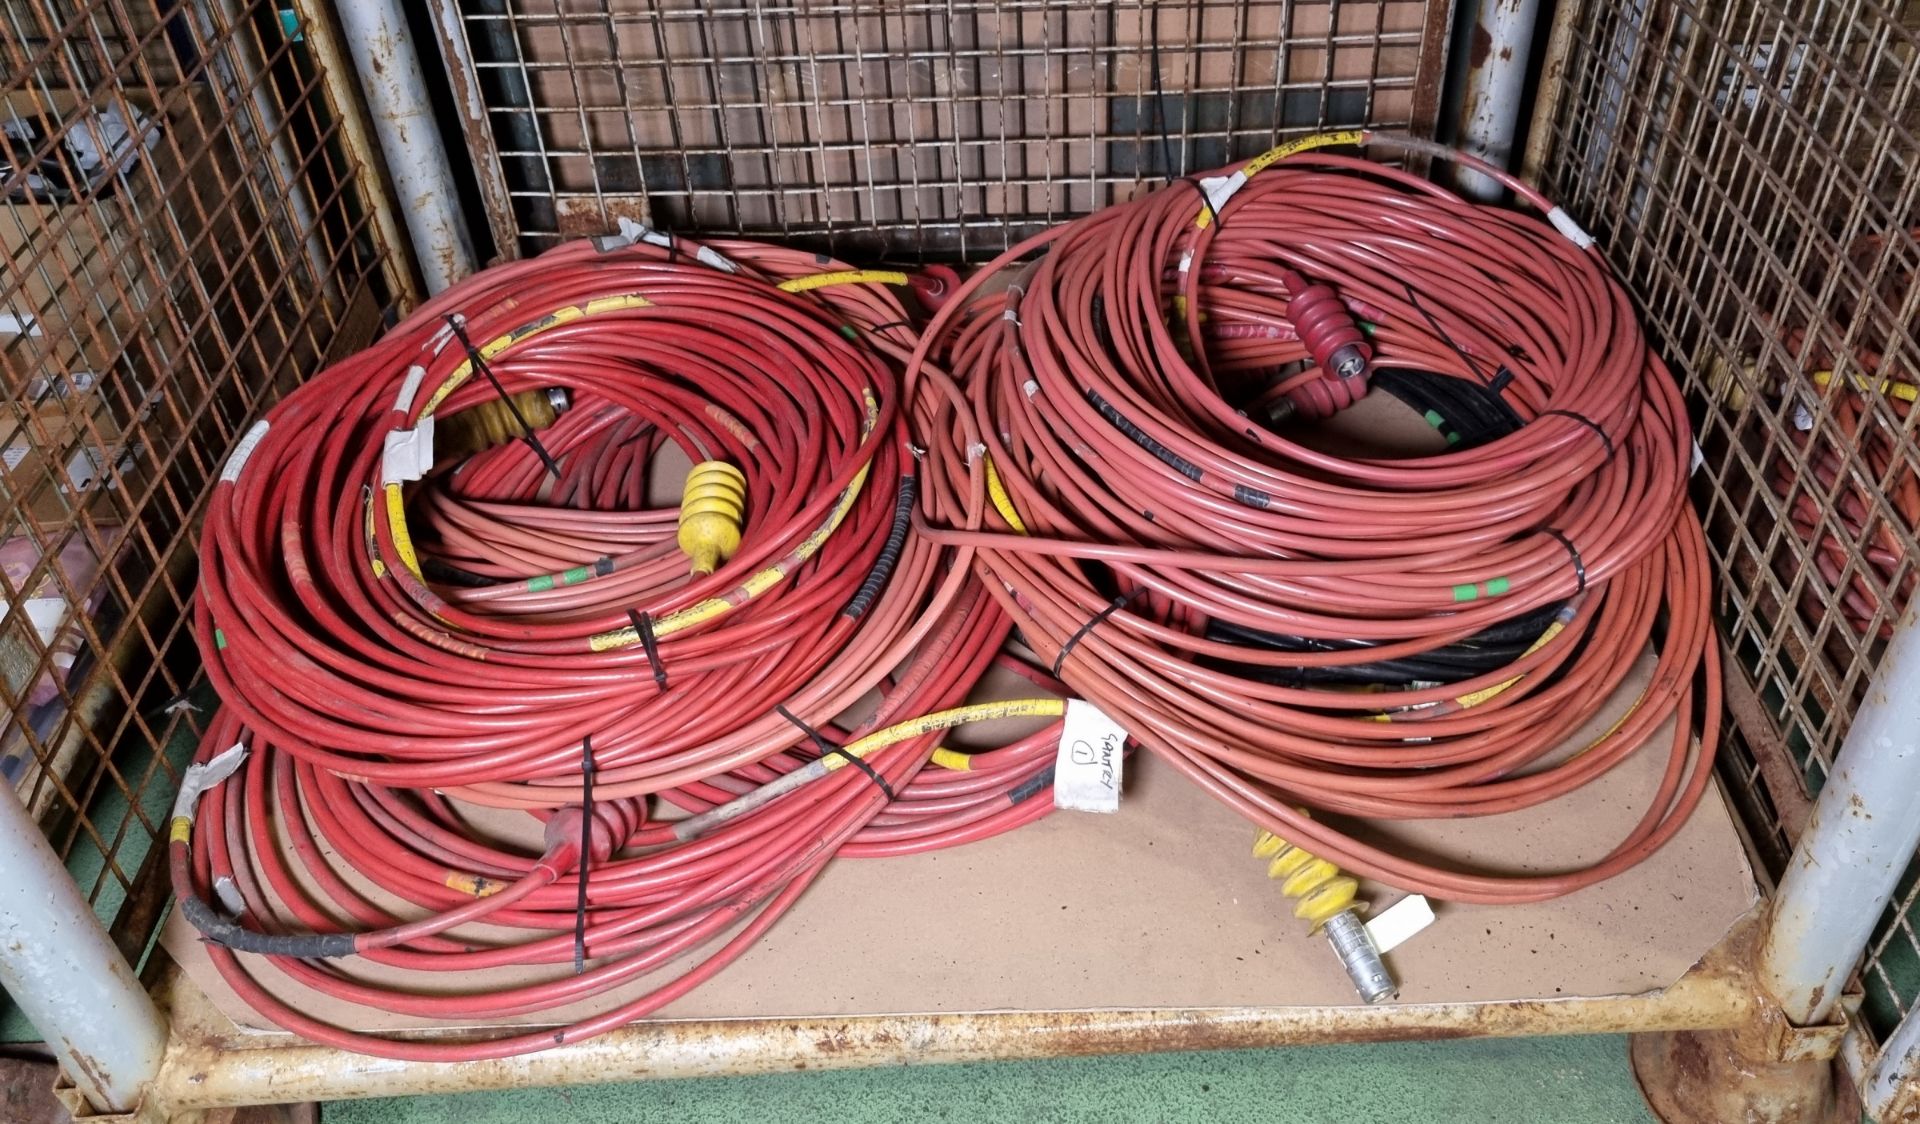 6 x Heavy duty single coaxial cable with Lemo connectors